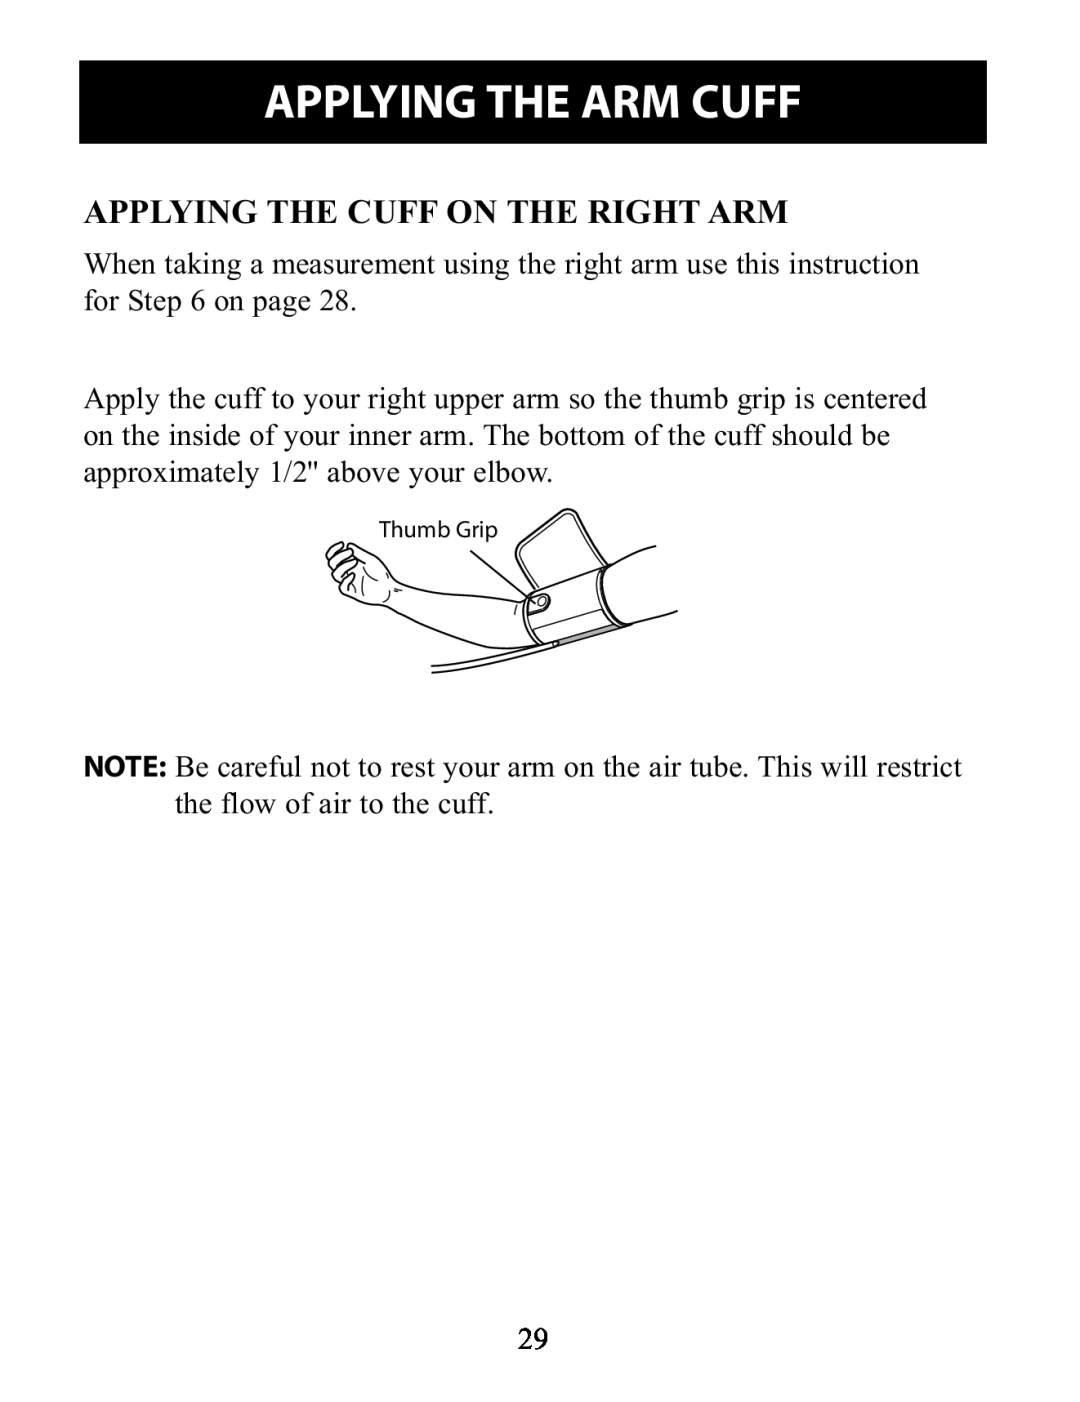 Omron Healthcare BP791IT instruction manual Applying The Cuff On The Right Arm, Applying The Arm Cuff 